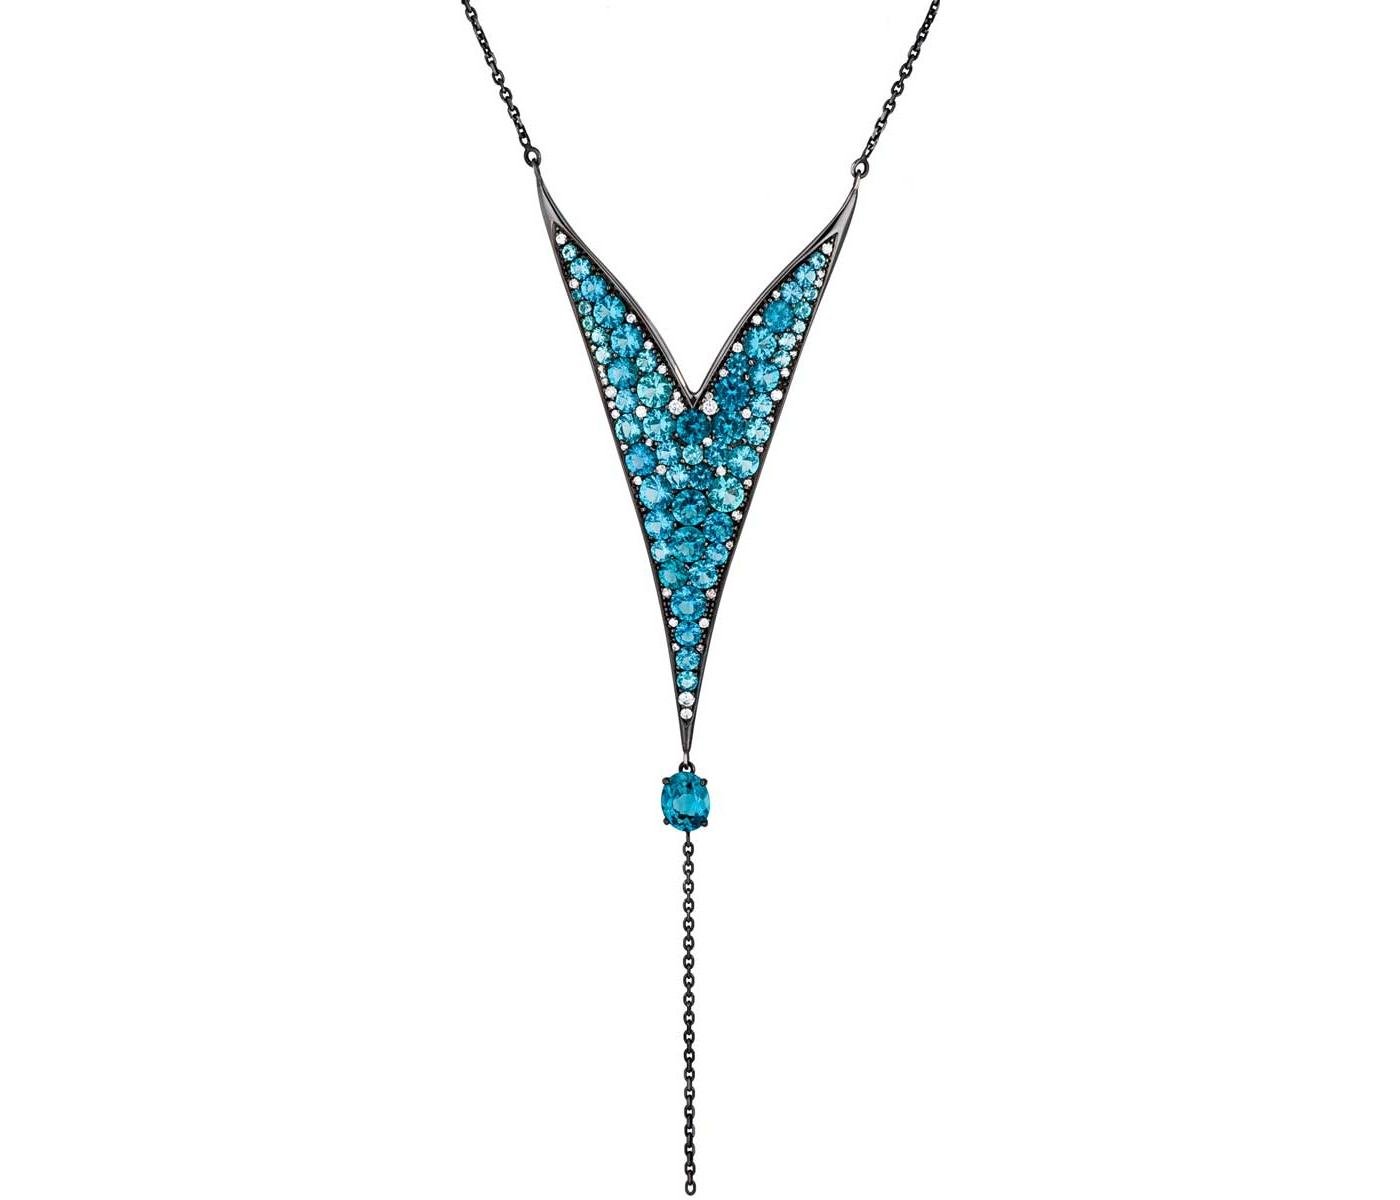 Necklace by Dietrich